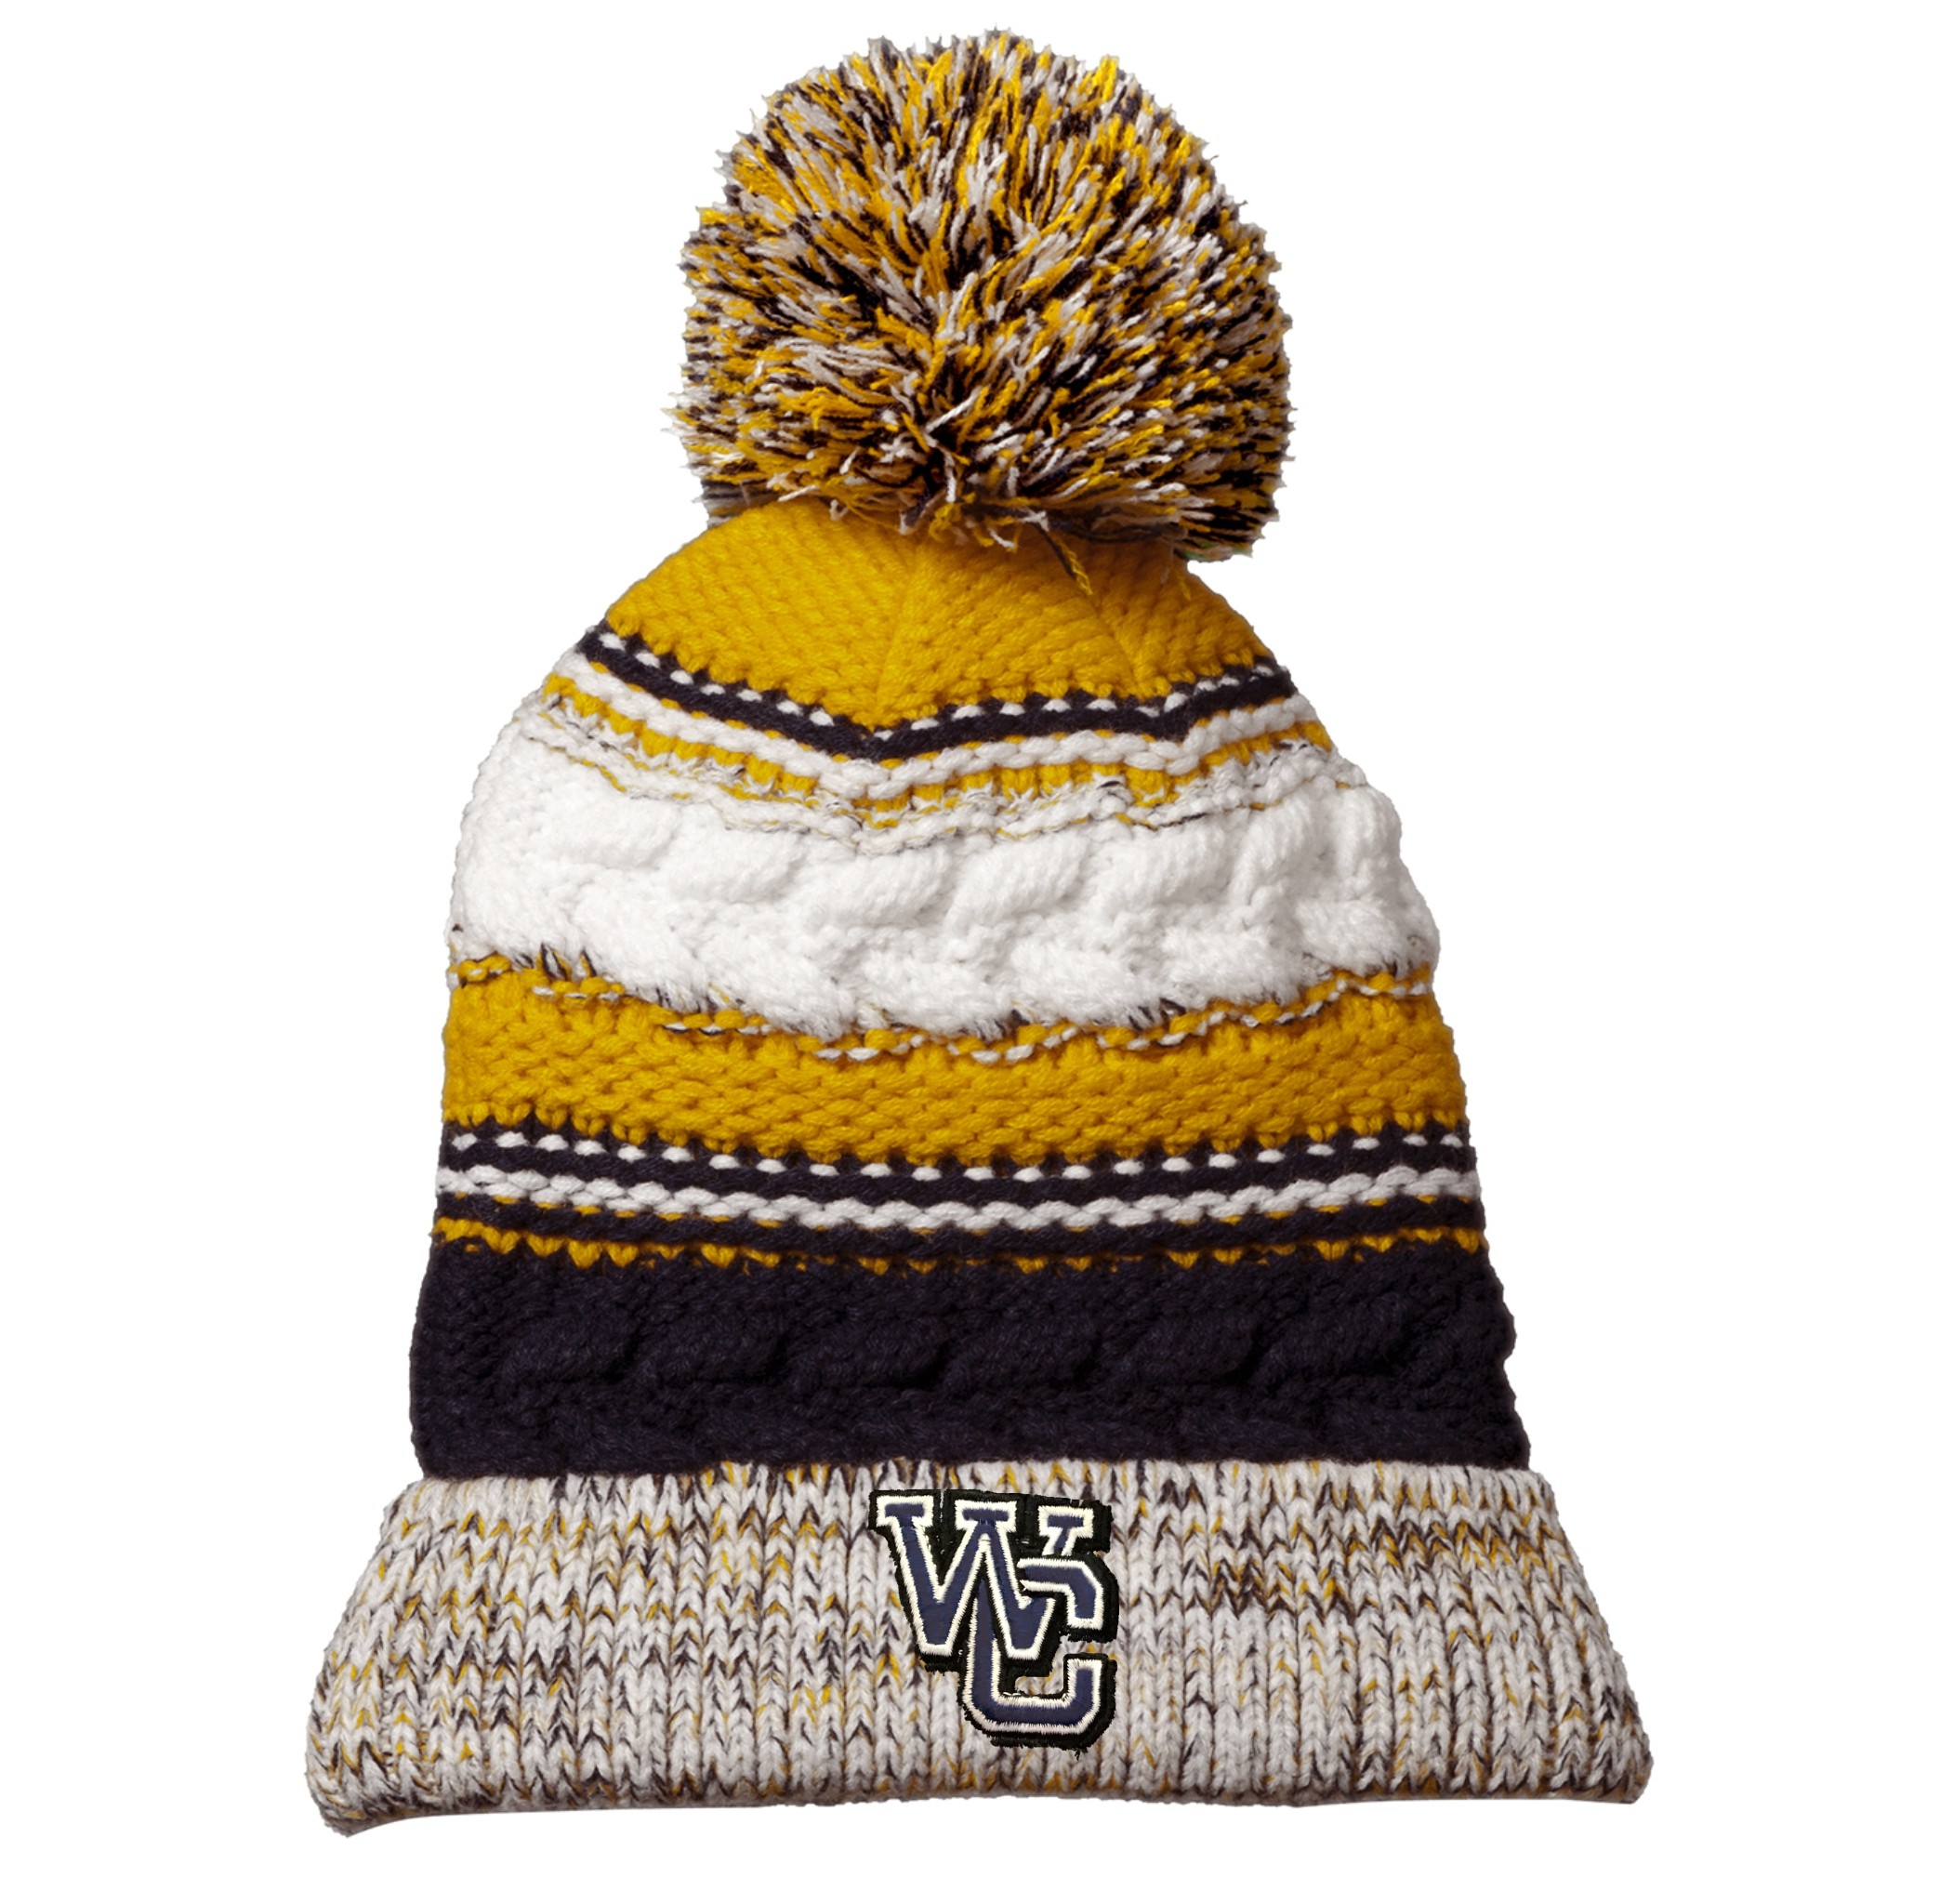 WC Knitted Hat - Gold